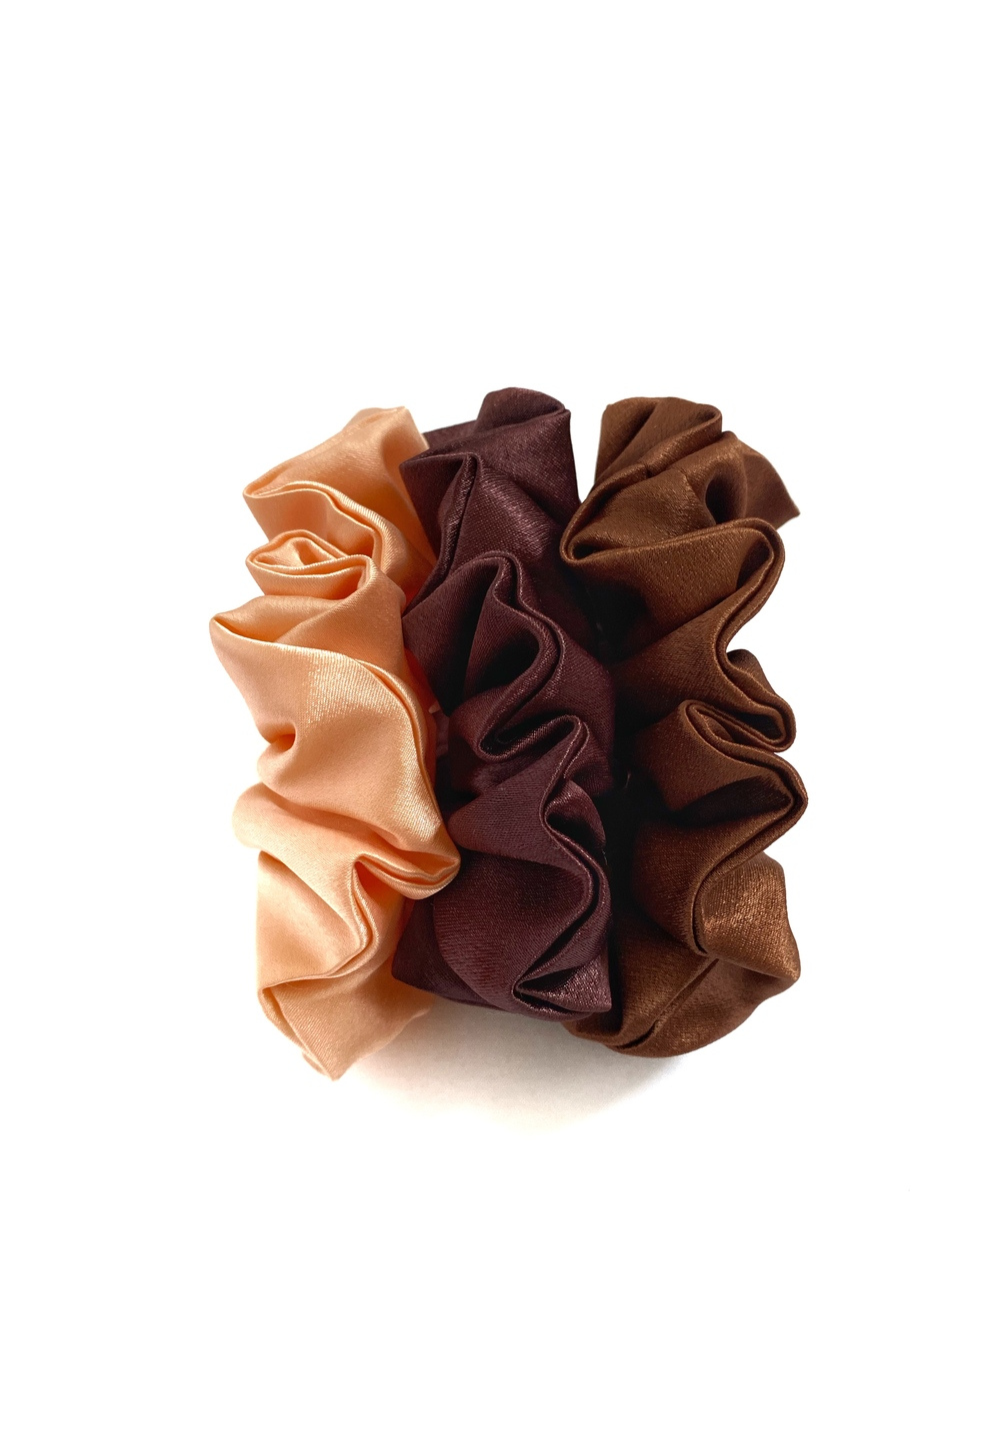 Toffee, Cocoa & Sand Silk Scrunchies